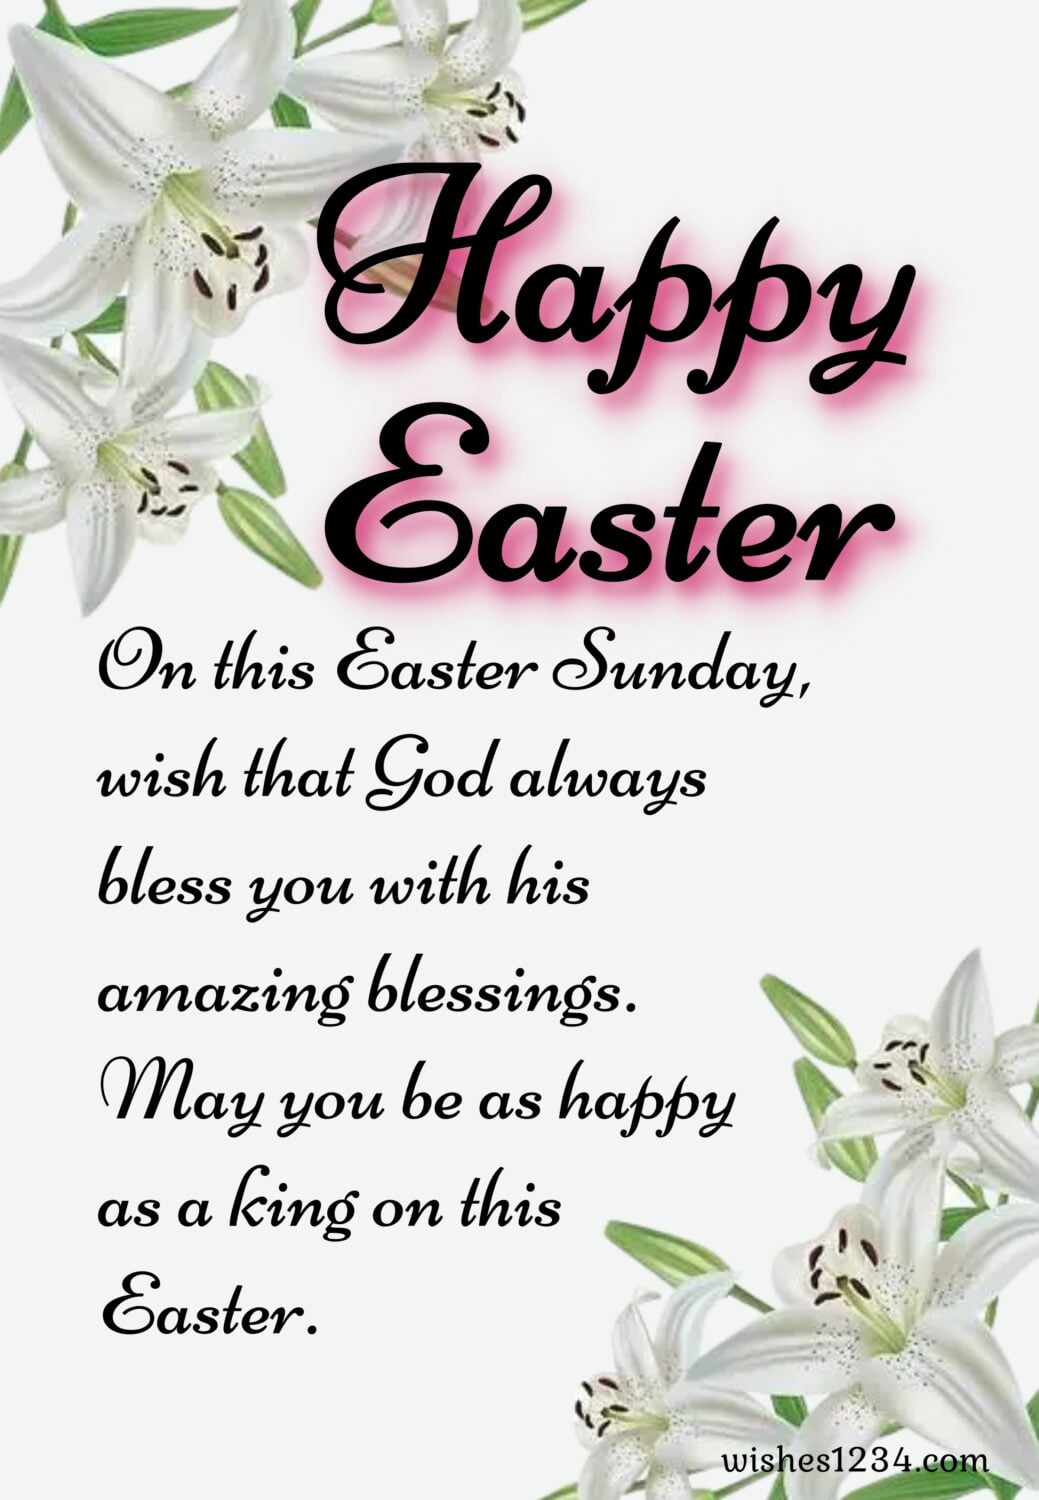 Easter grretings with white lily, Happy Easter Wishes, Quotes & Images.